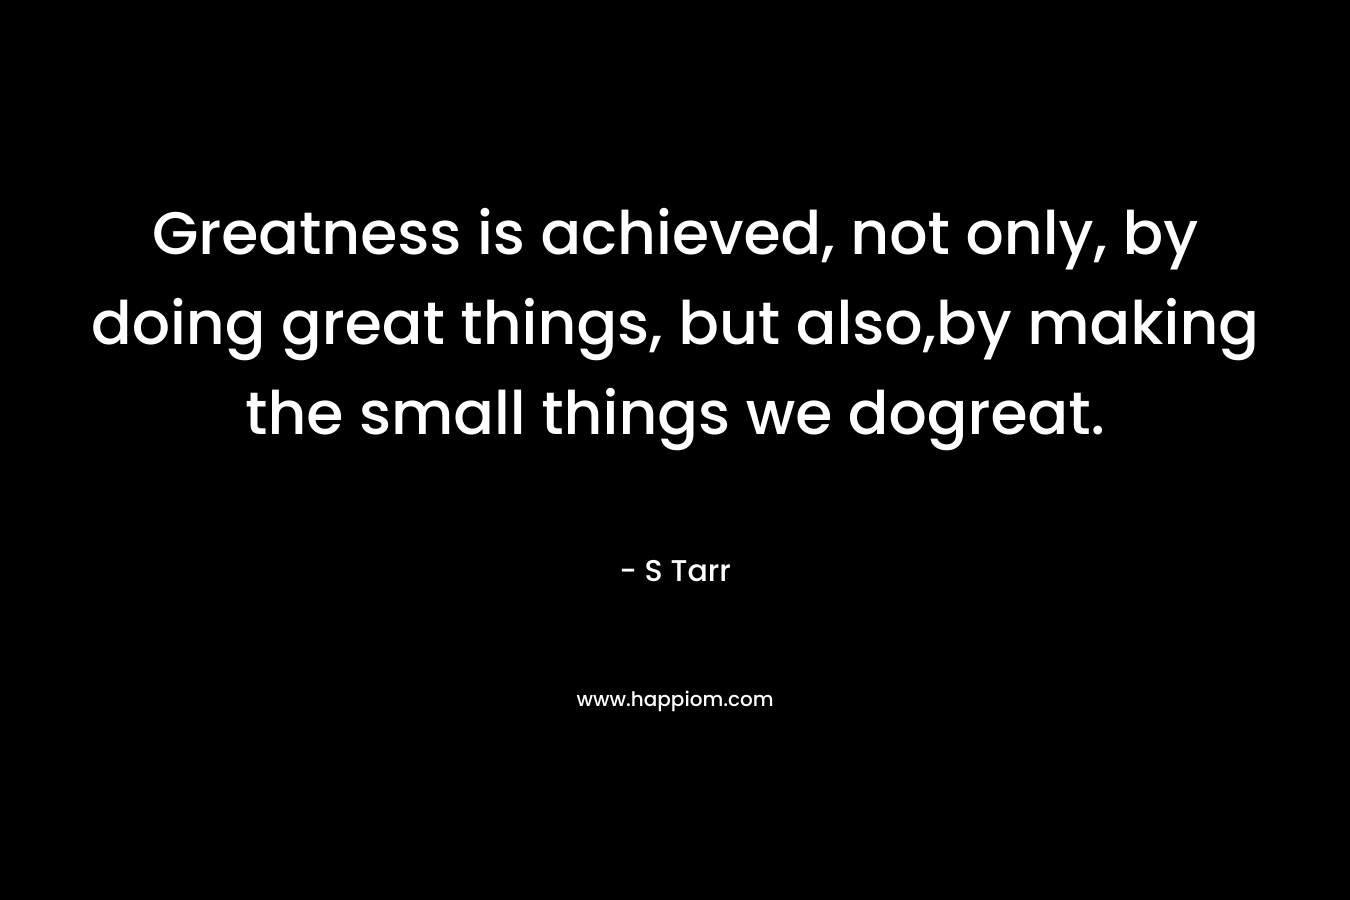 Greatness is achieved, not only, by doing great things, but also,by making the small things we dogreat.